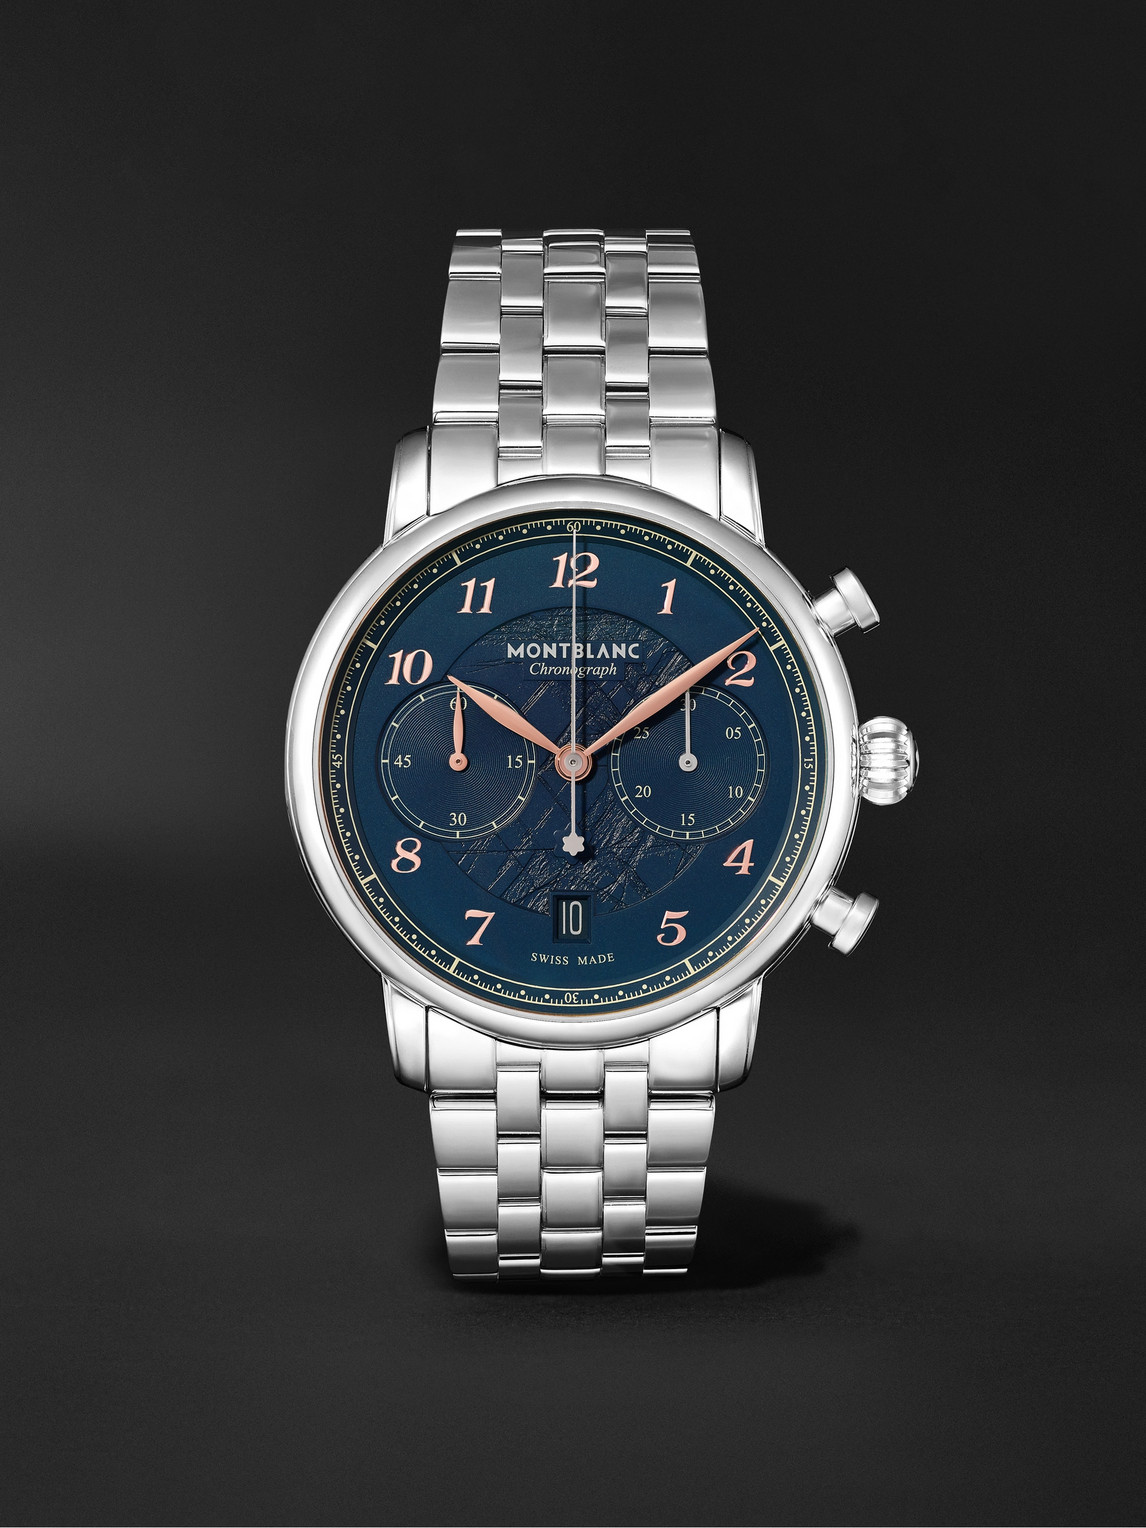 Montblanc Star Legacy Chronograph Limited Edition Automatic 42mm Stainless Steel Watch, Ref. No. 129627 In Blue